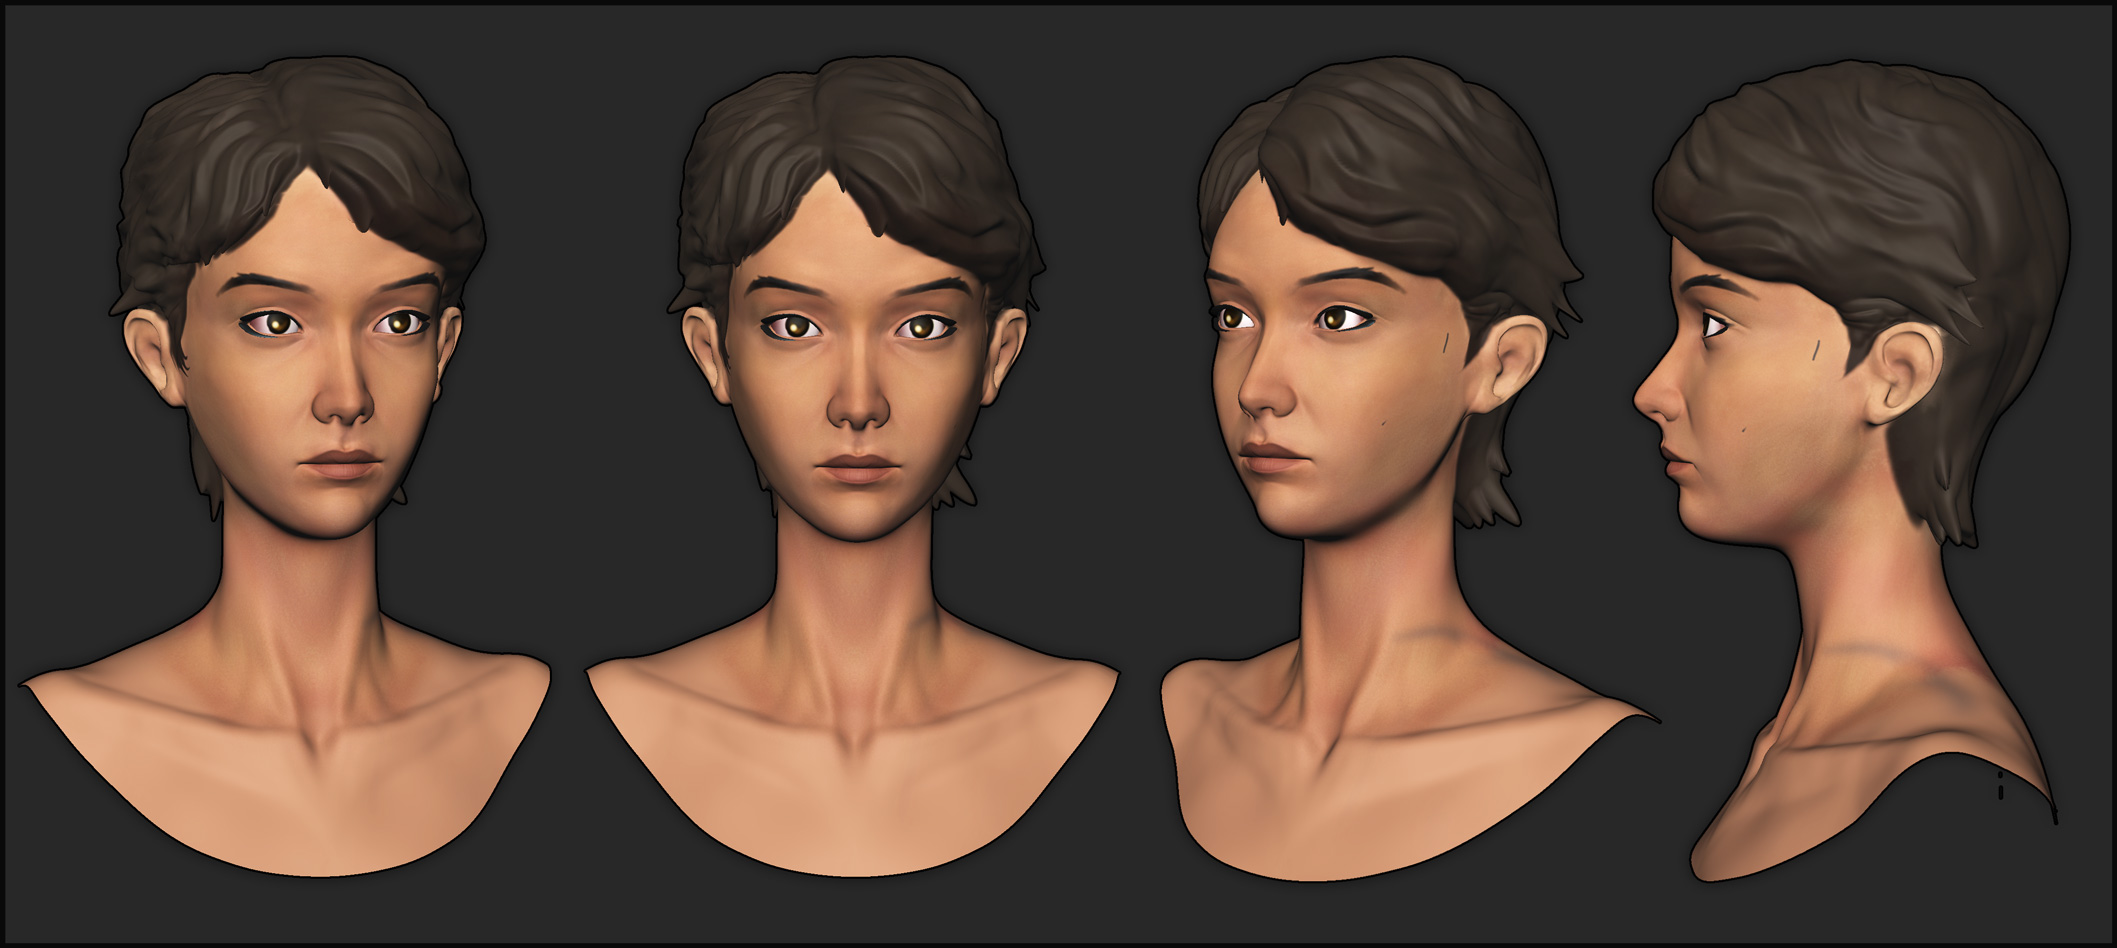 _wip_2__older_clementine_from_telltale_s_twd_by_yuliuskrisna-d862upo.jpg